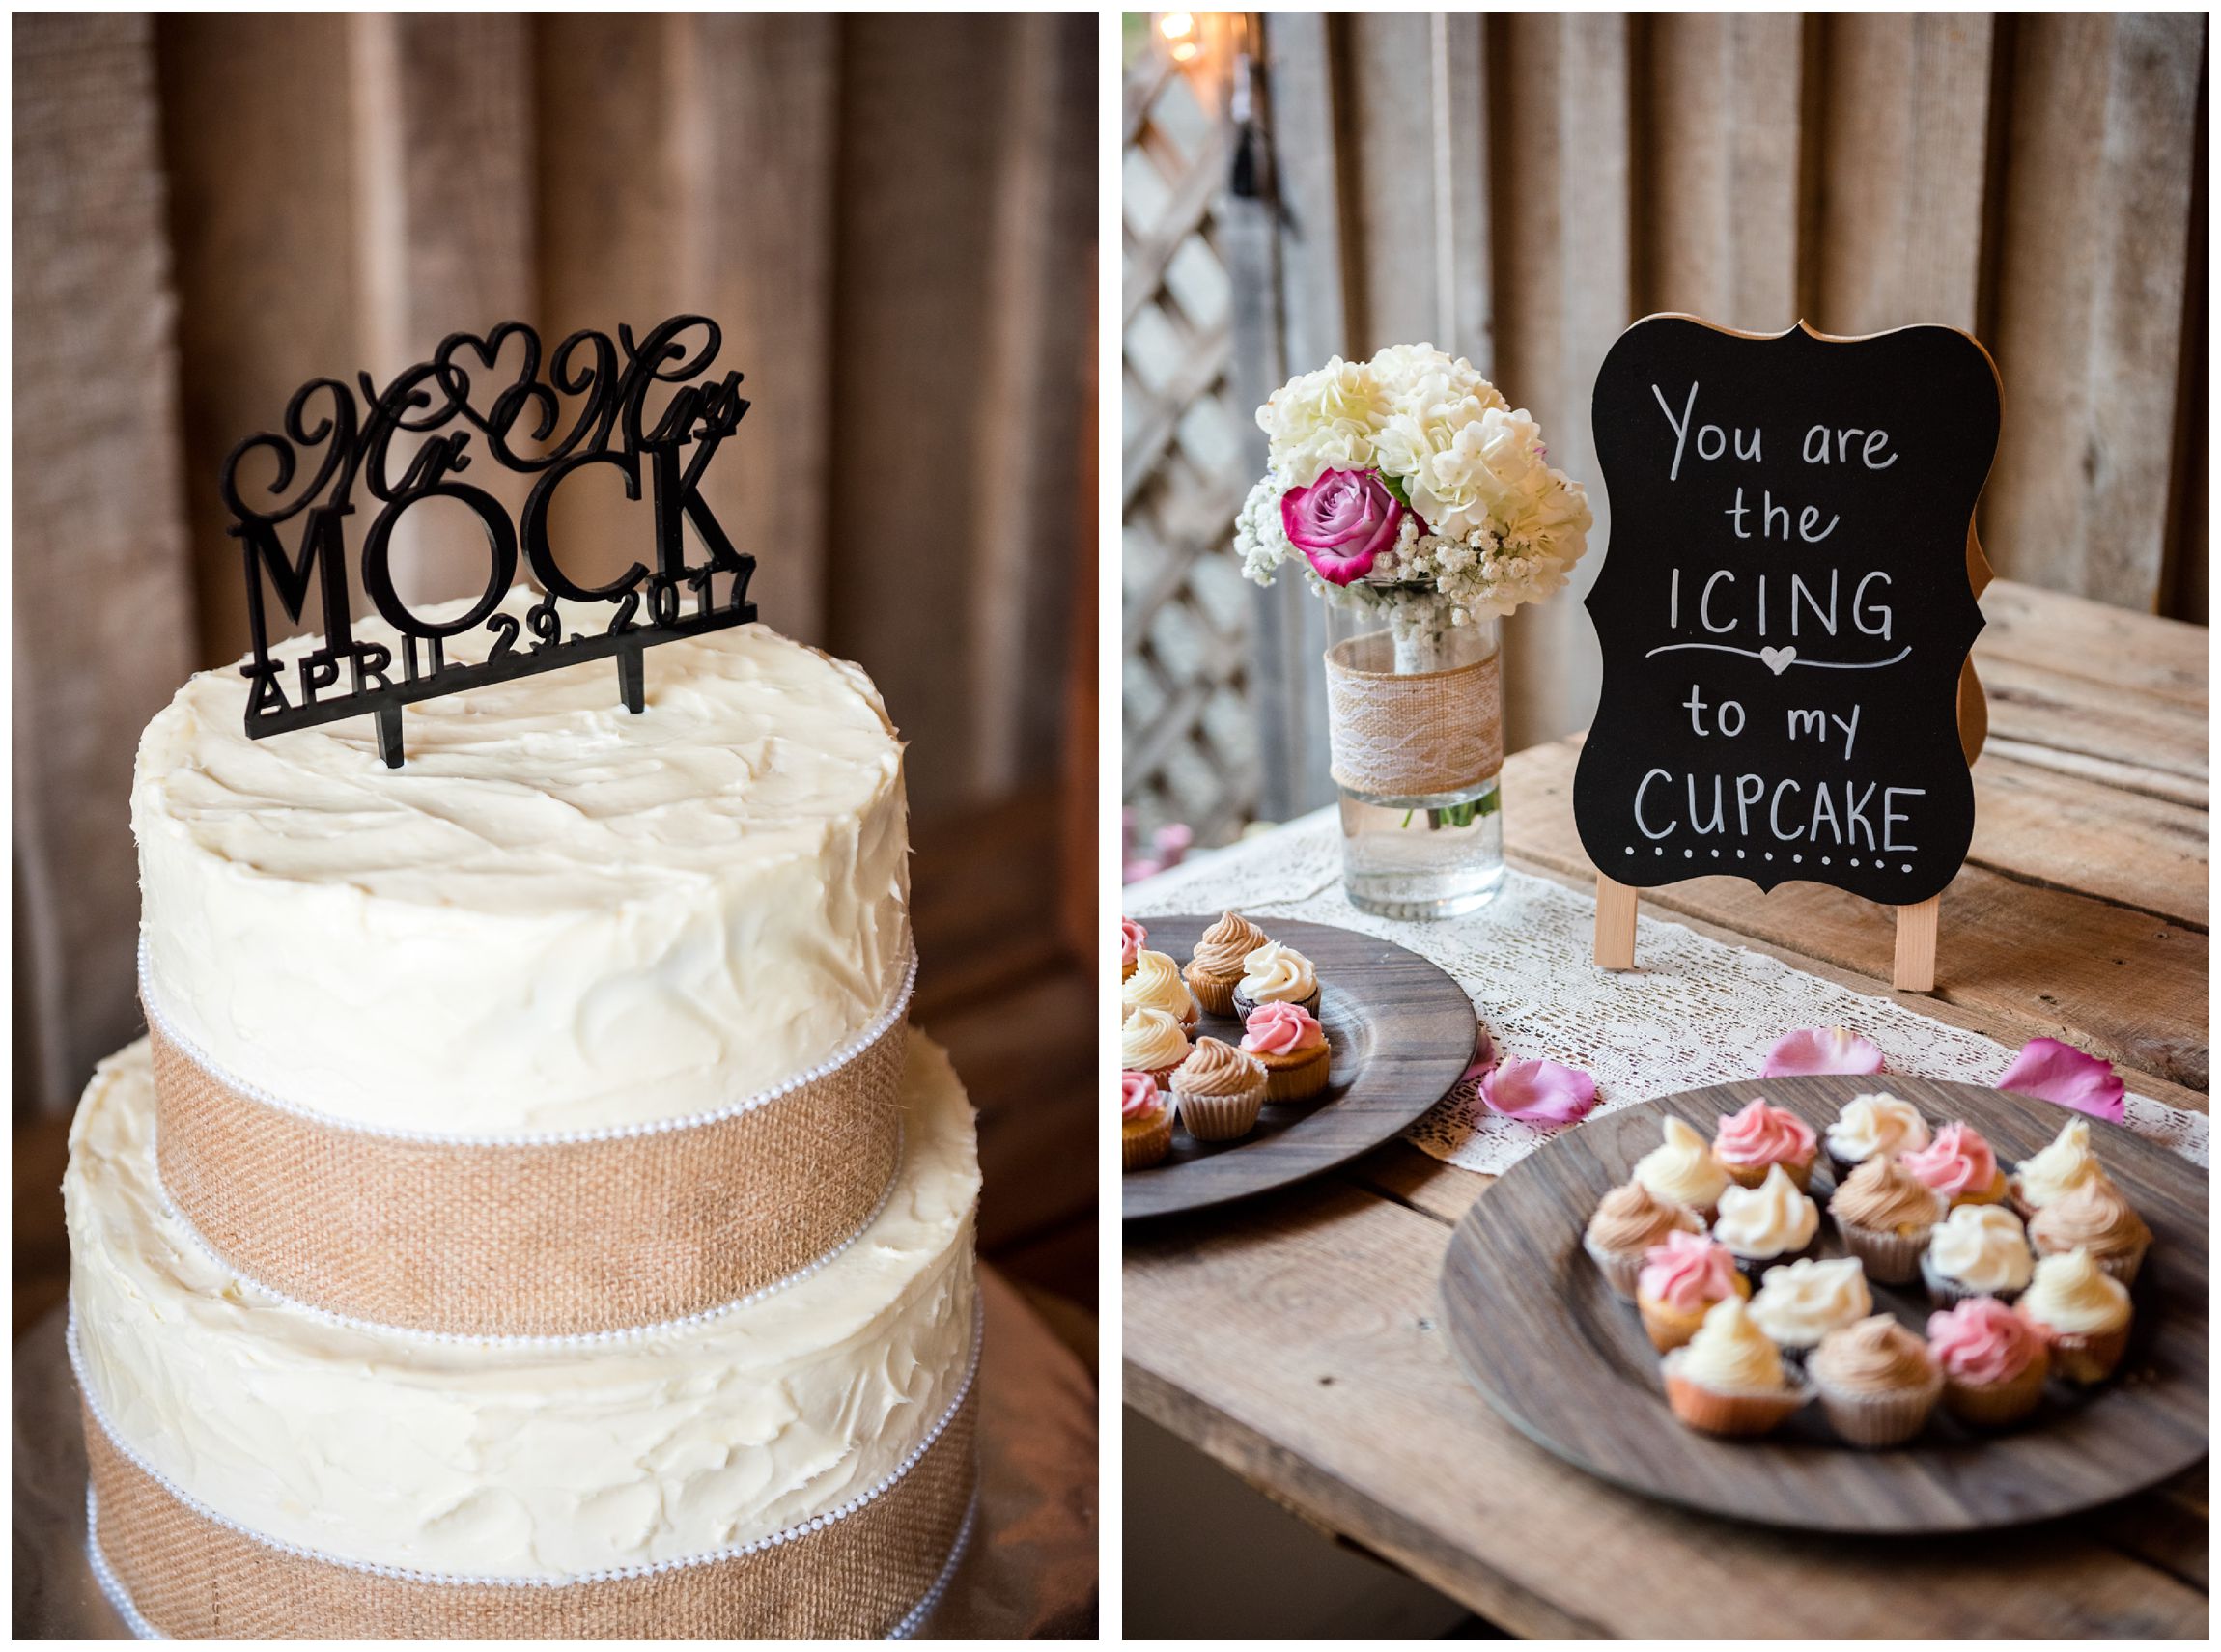 cake with burlap decor and cupcakes at rustic farm wedding reception